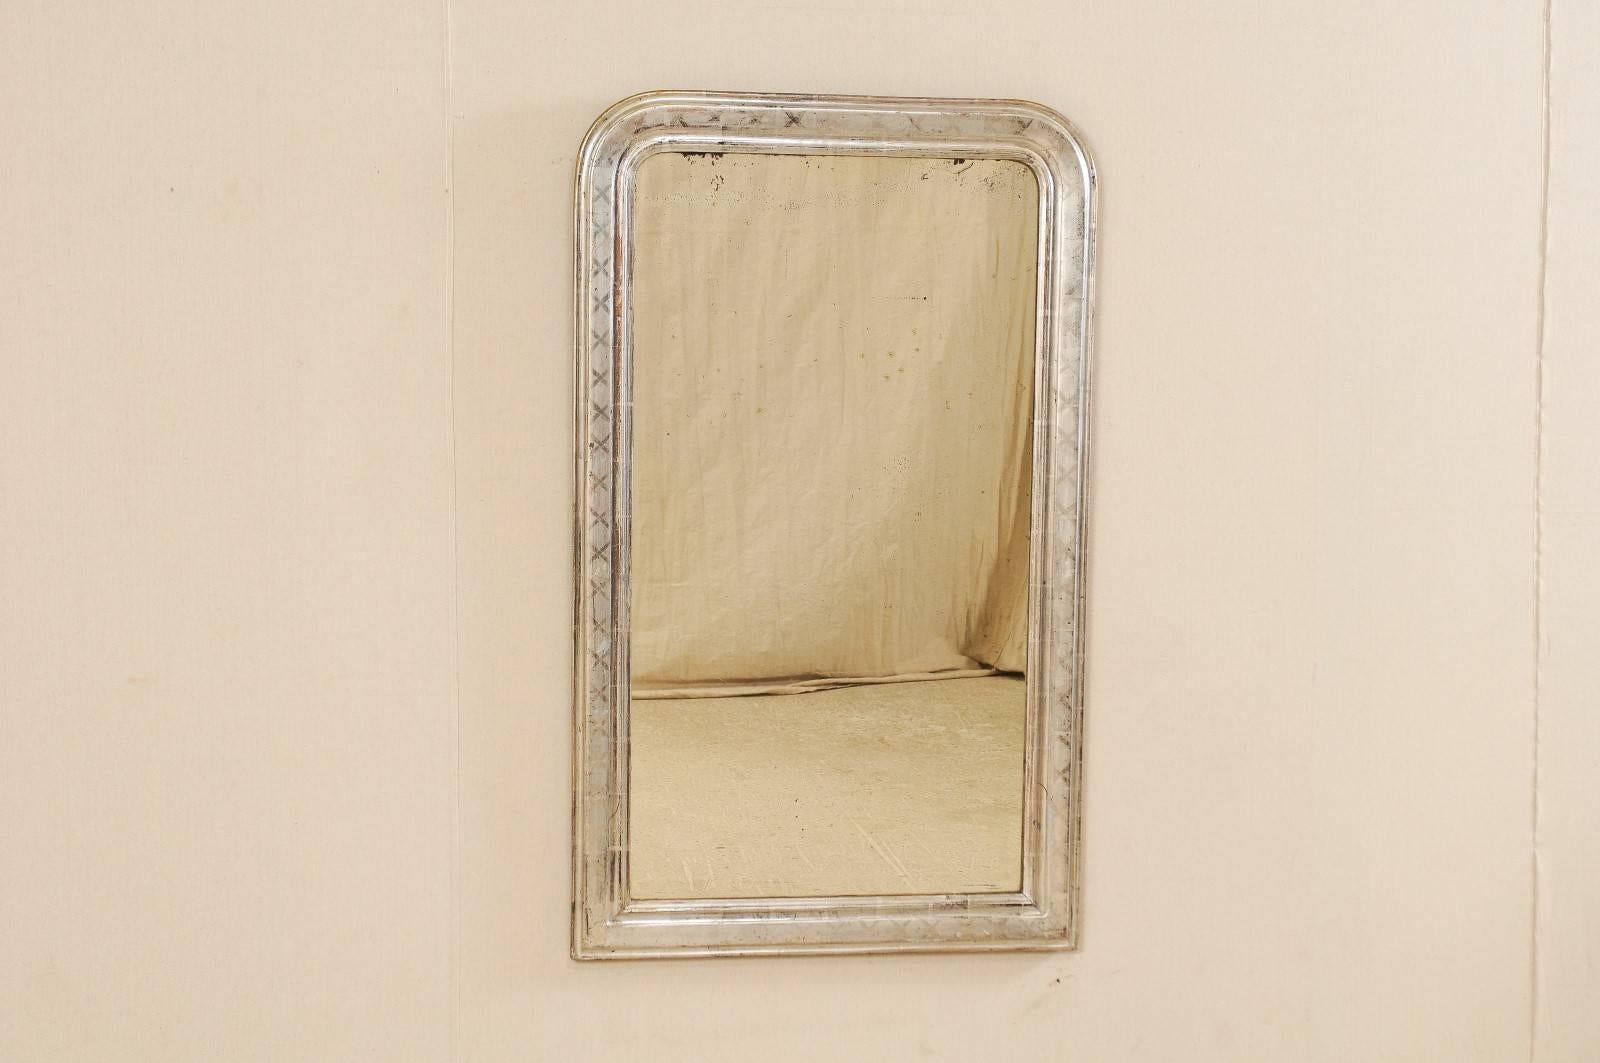 An antique French silver gilt Louis-Philippe style mirror. This French Louis-Philippe style mirror from the late 19th-early 20th century features a silver gilt carved wood frame with faint X-shaped patterns repeating about the surround. This mirror